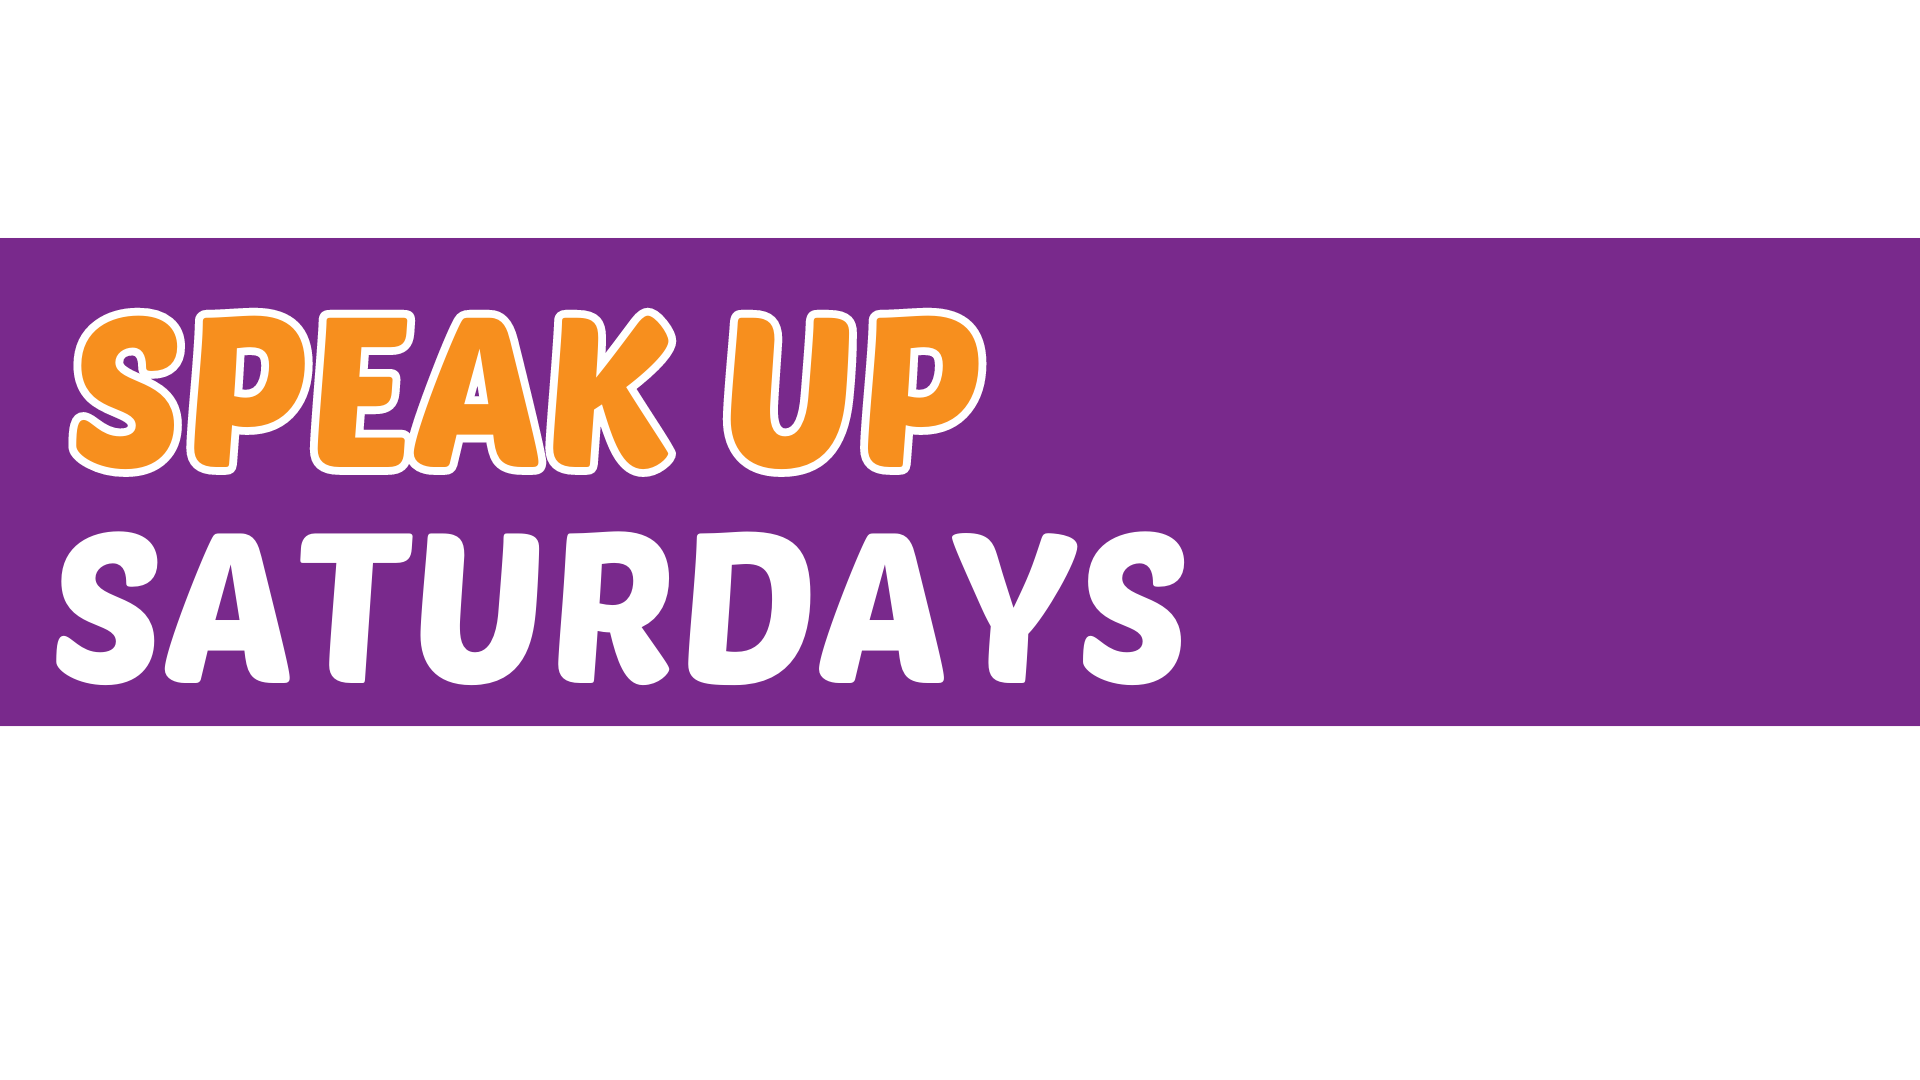 Banner. Text on a purple background reads Speak Up Saturdays. Speak Up is orange with a white outline and Saturdays is white.